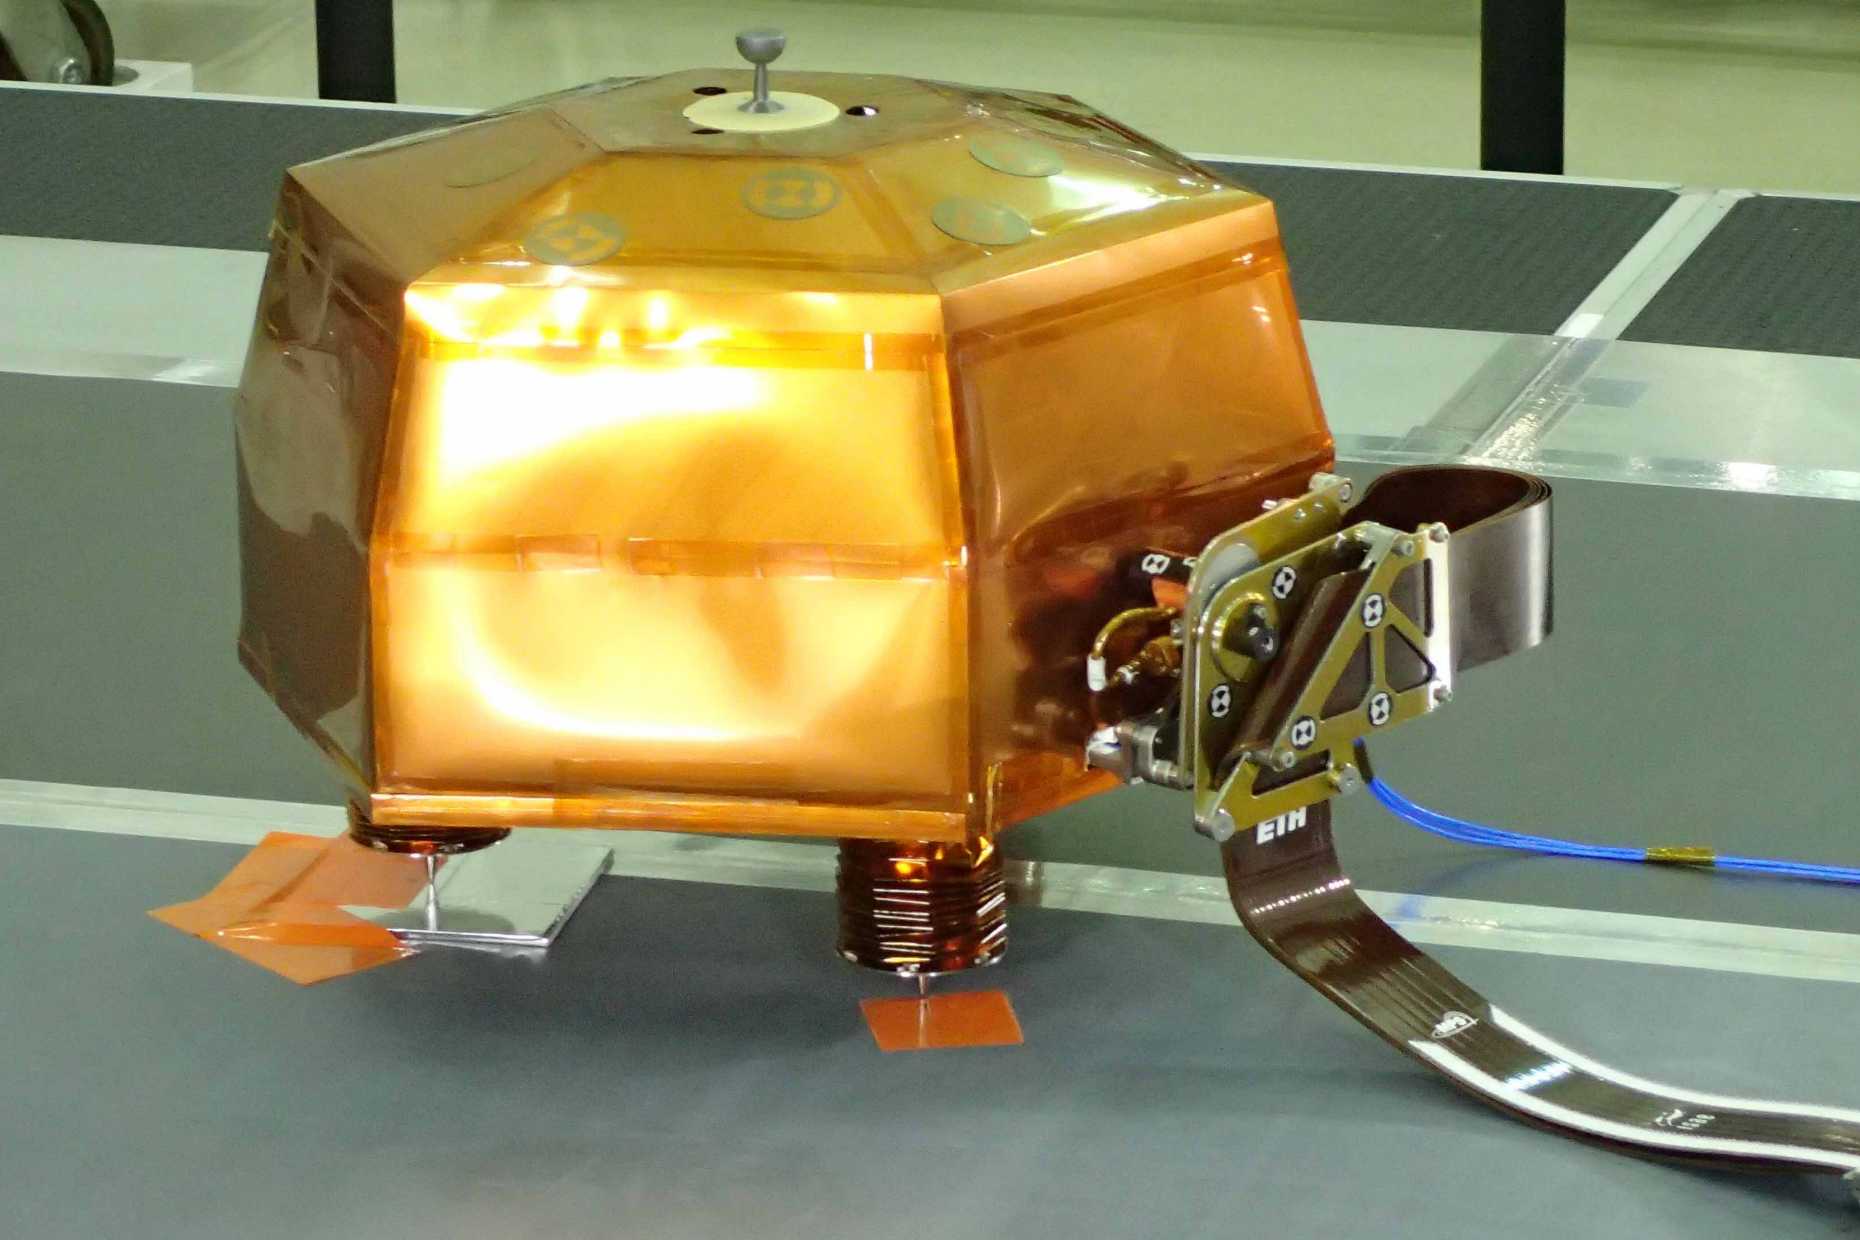 Enlarged view: The seismometer that is supposed to detect seismic waves on Mars.